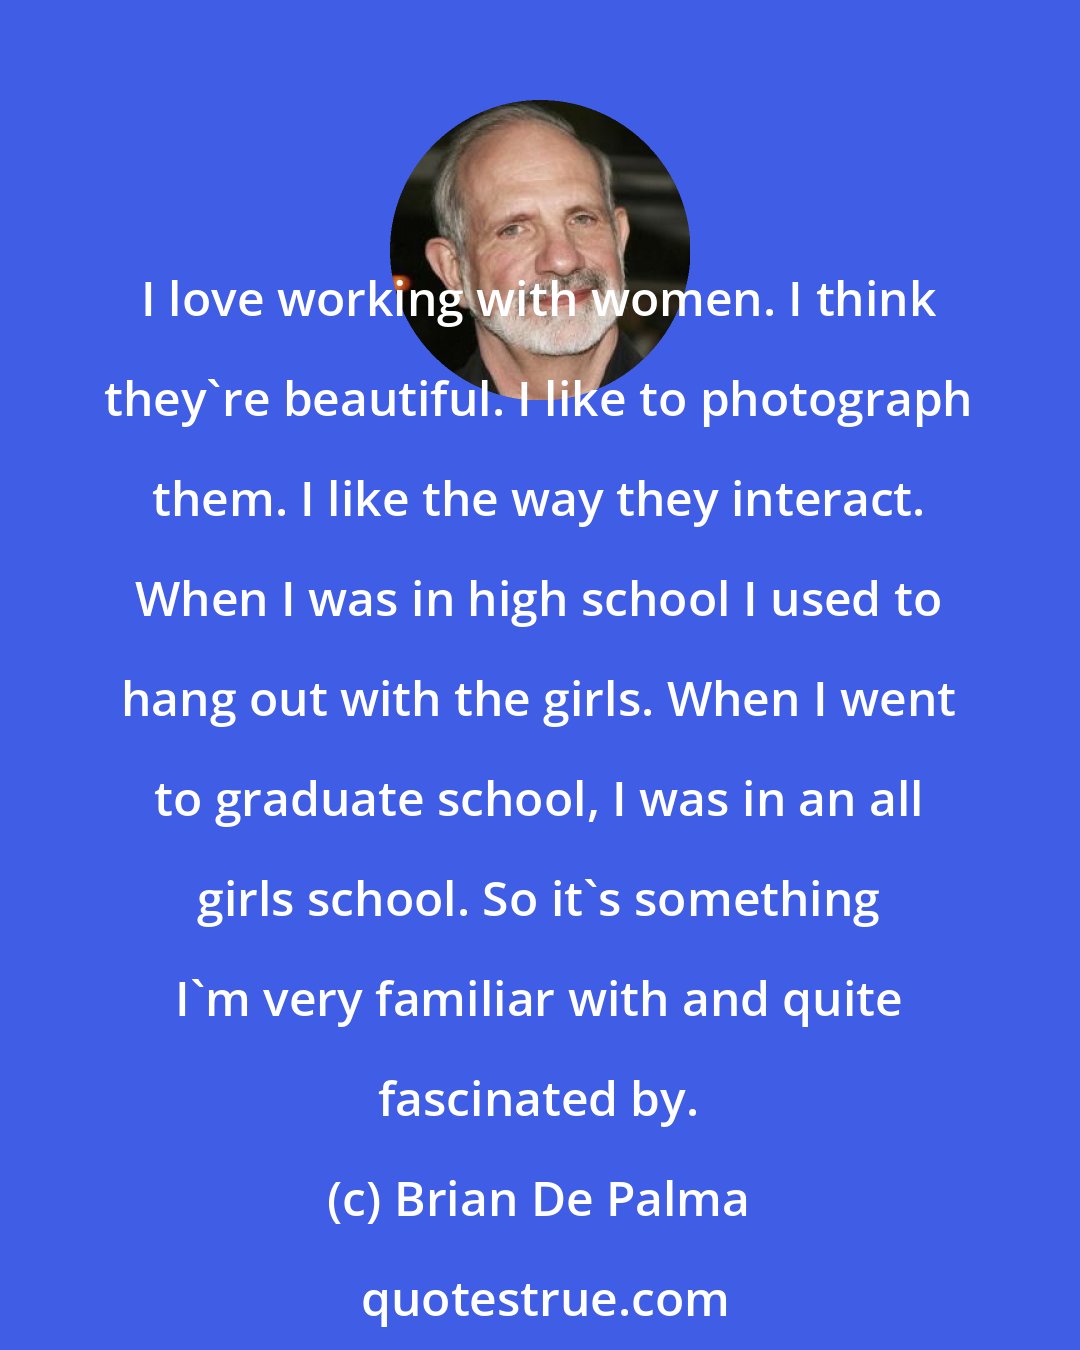 Brian De Palma: I love working with women. I think they're beautiful. I like to photograph them. I like the way they interact. When I was in high school I used to hang out with the girls. When I went to graduate school, I was in an all girls school. So it's something I'm very familiar with and quite fascinated by.